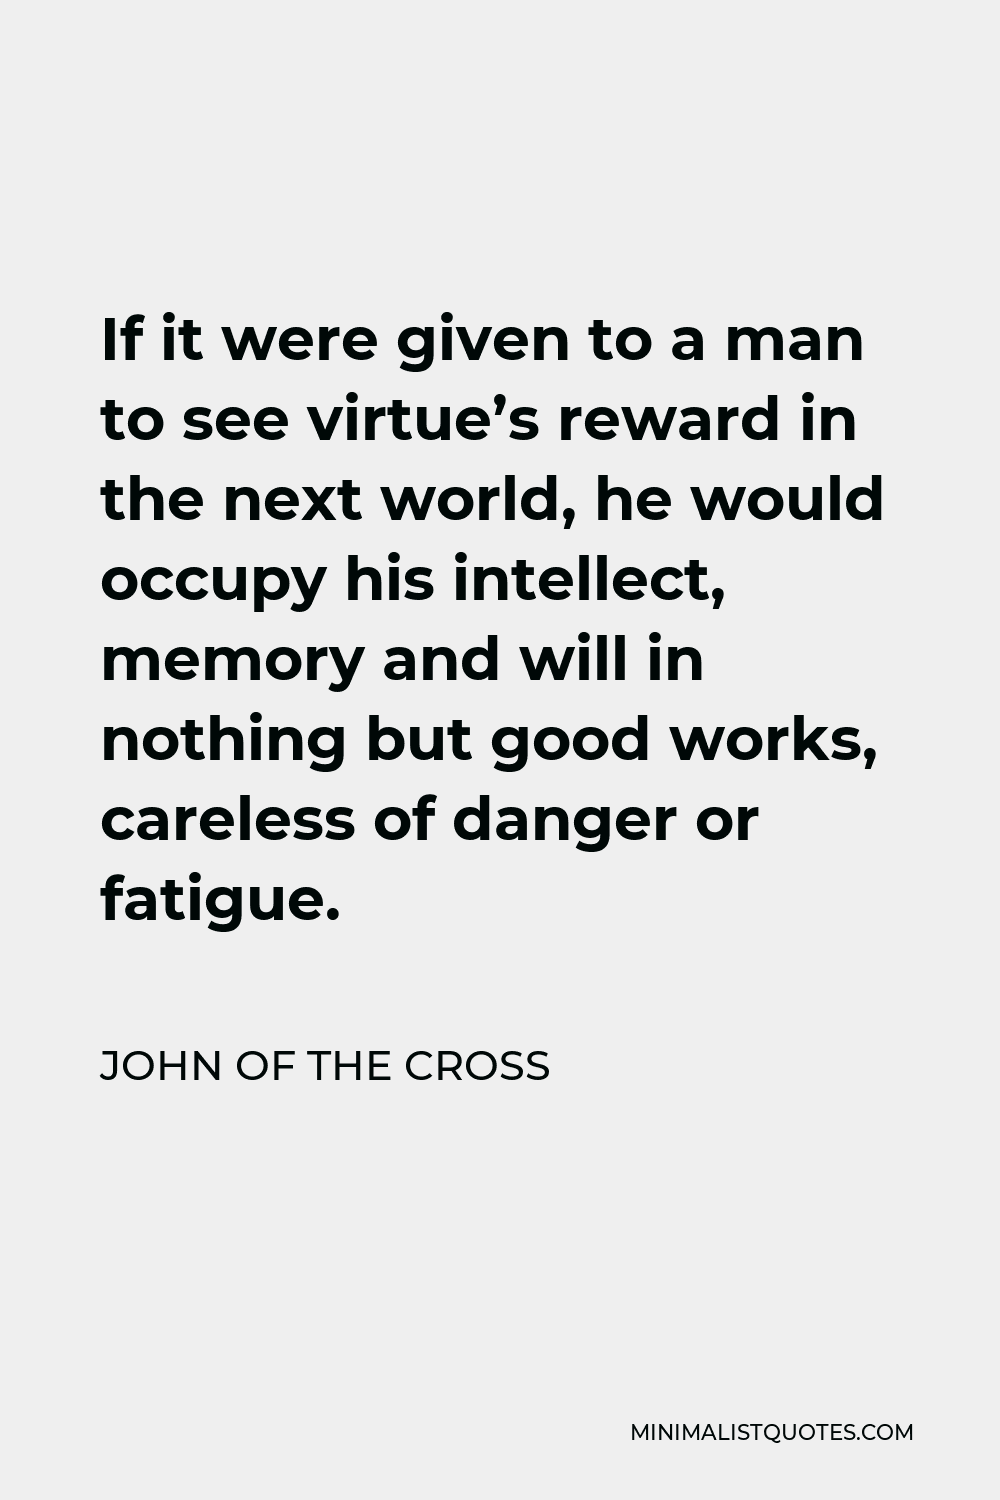 John of the Cross Quote - If it were given to a man to see virtue’s reward in the next world, he would occupy his intellect, memory and will in nothing but good works, careless of danger or fatigue.